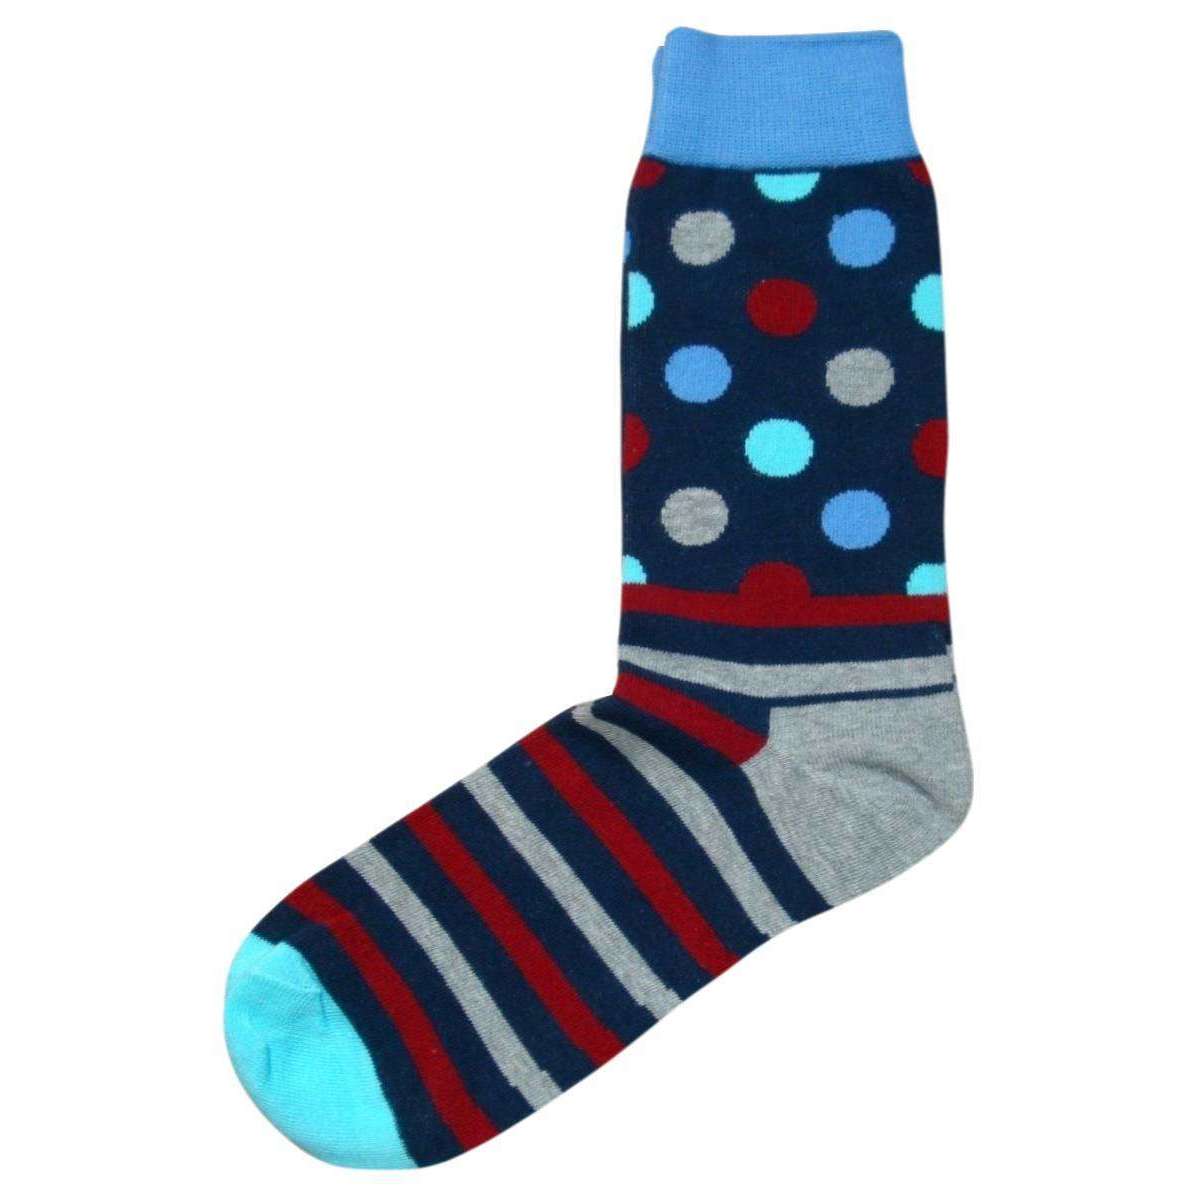 Bassin and Brown Contrast Heel and Toe Striped Socks - Grey/Blue/Wine